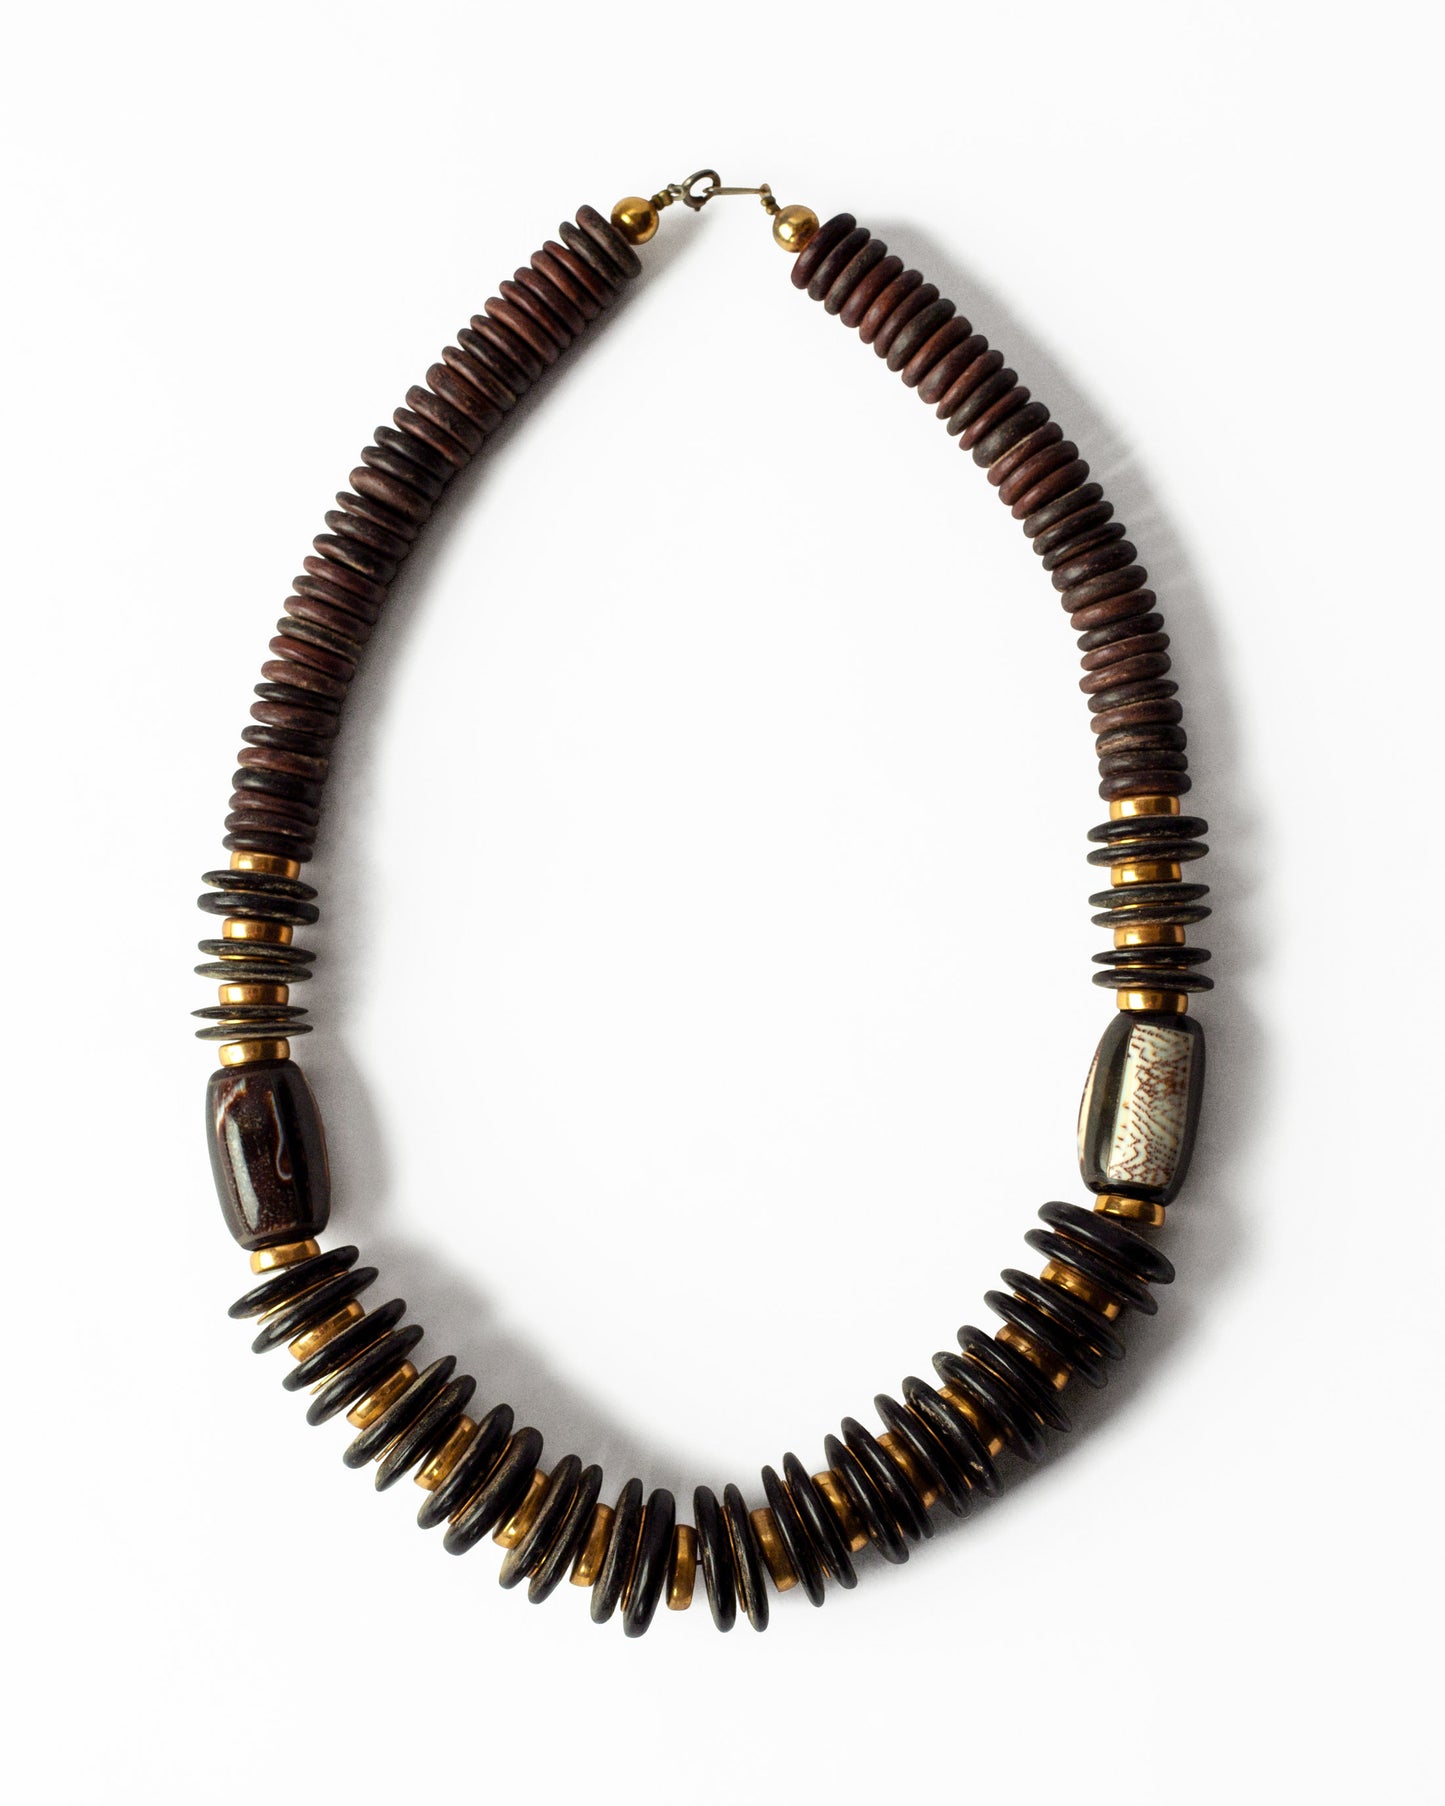 FALLON-set-necklaces-wood-pearls-vintage-women-luxury-clothing-rare-fashion-curated-art-collection